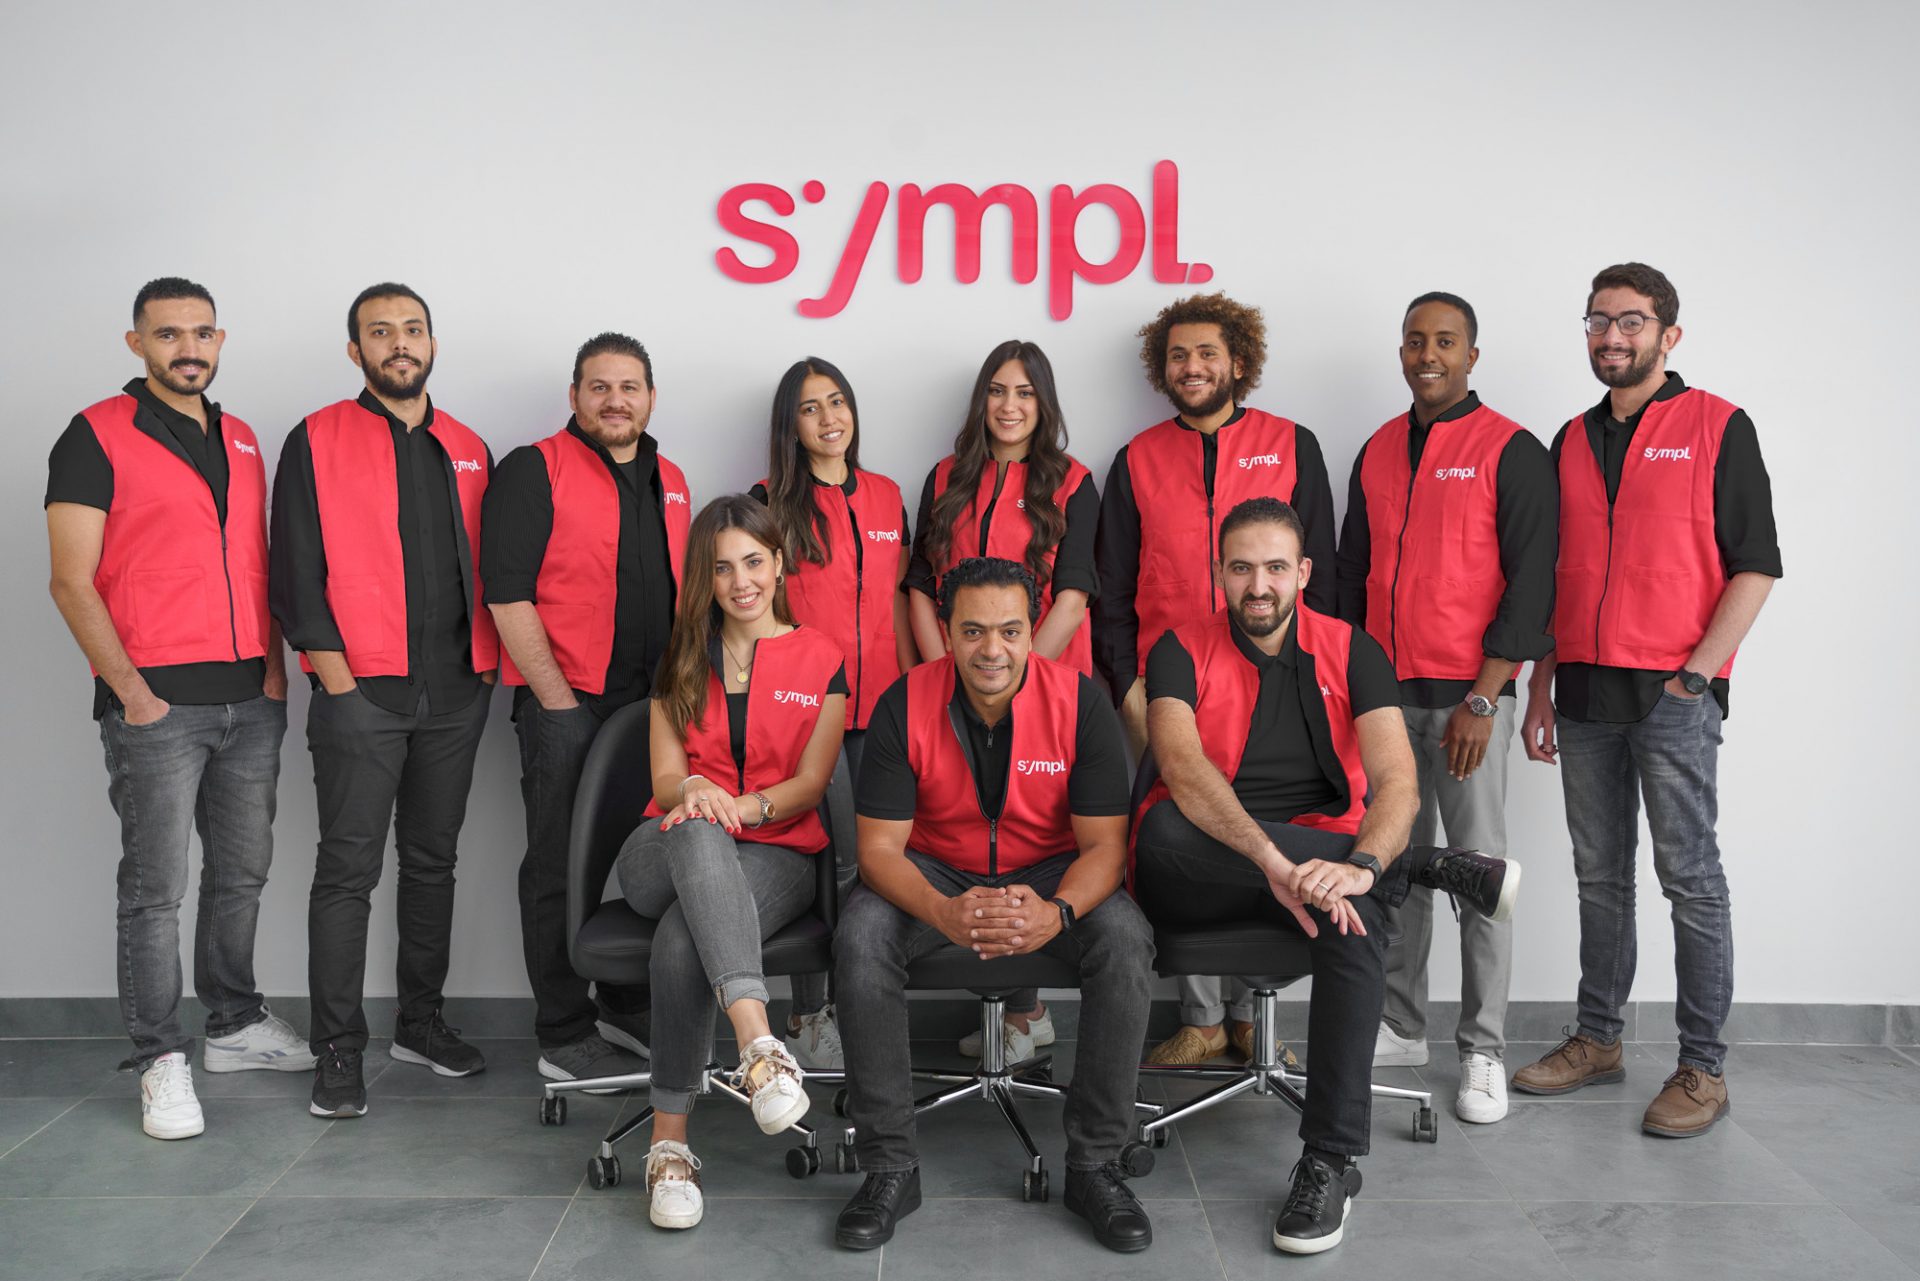 egyptian-fintech-sympl-raises-$6m-for-its-‘save-now,-pay-later’-service